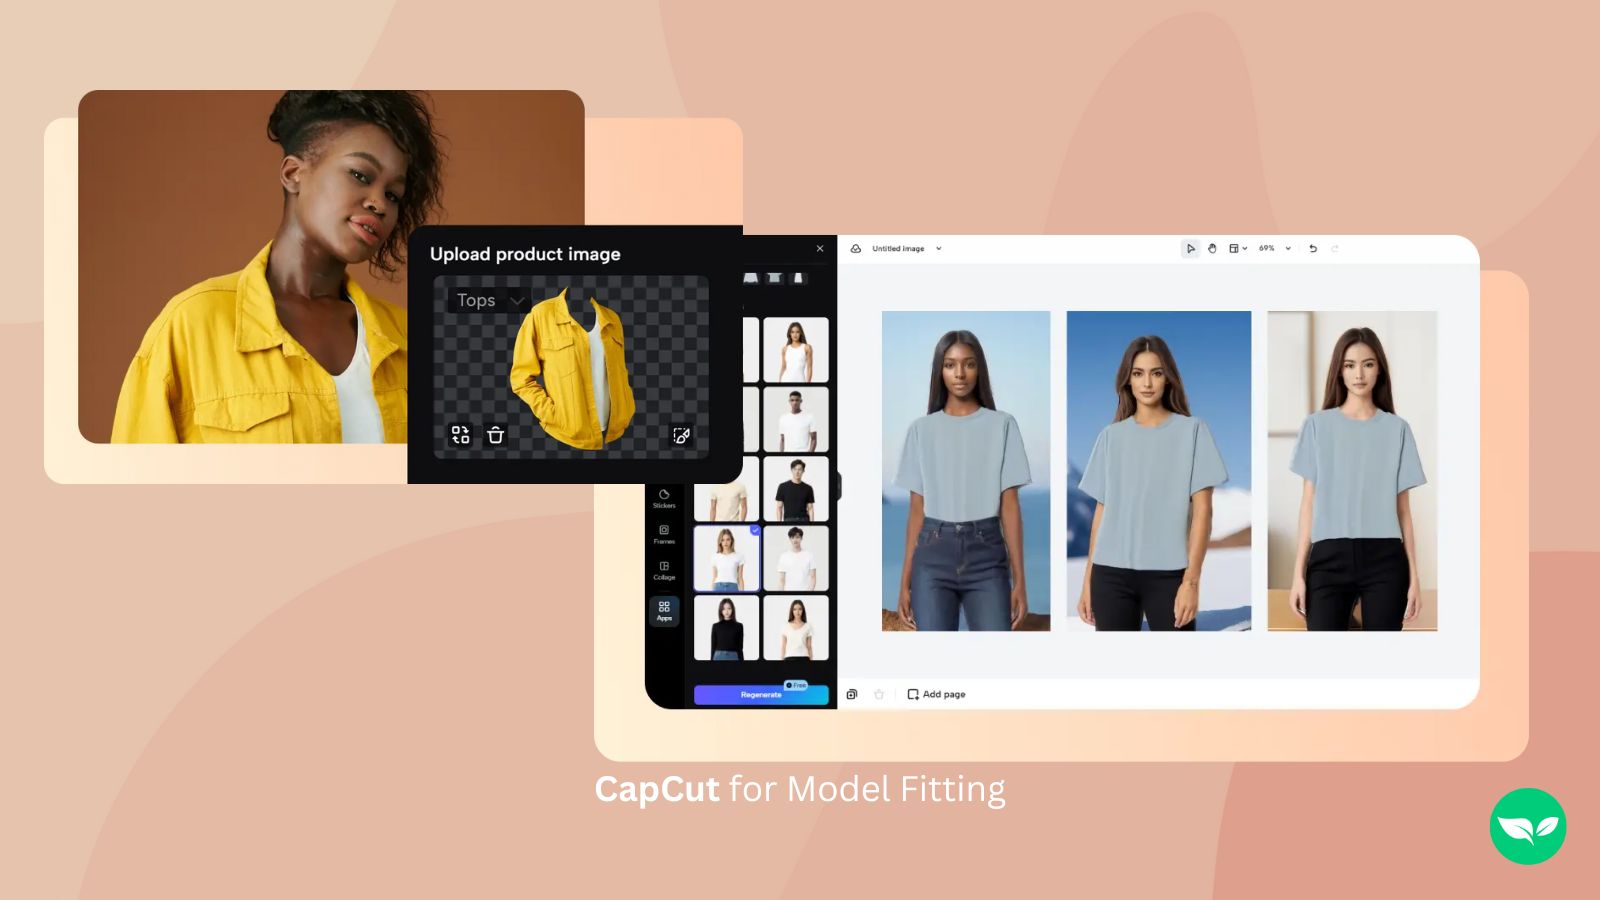 Screenshots from CapCut showing their Model Fitting feature.